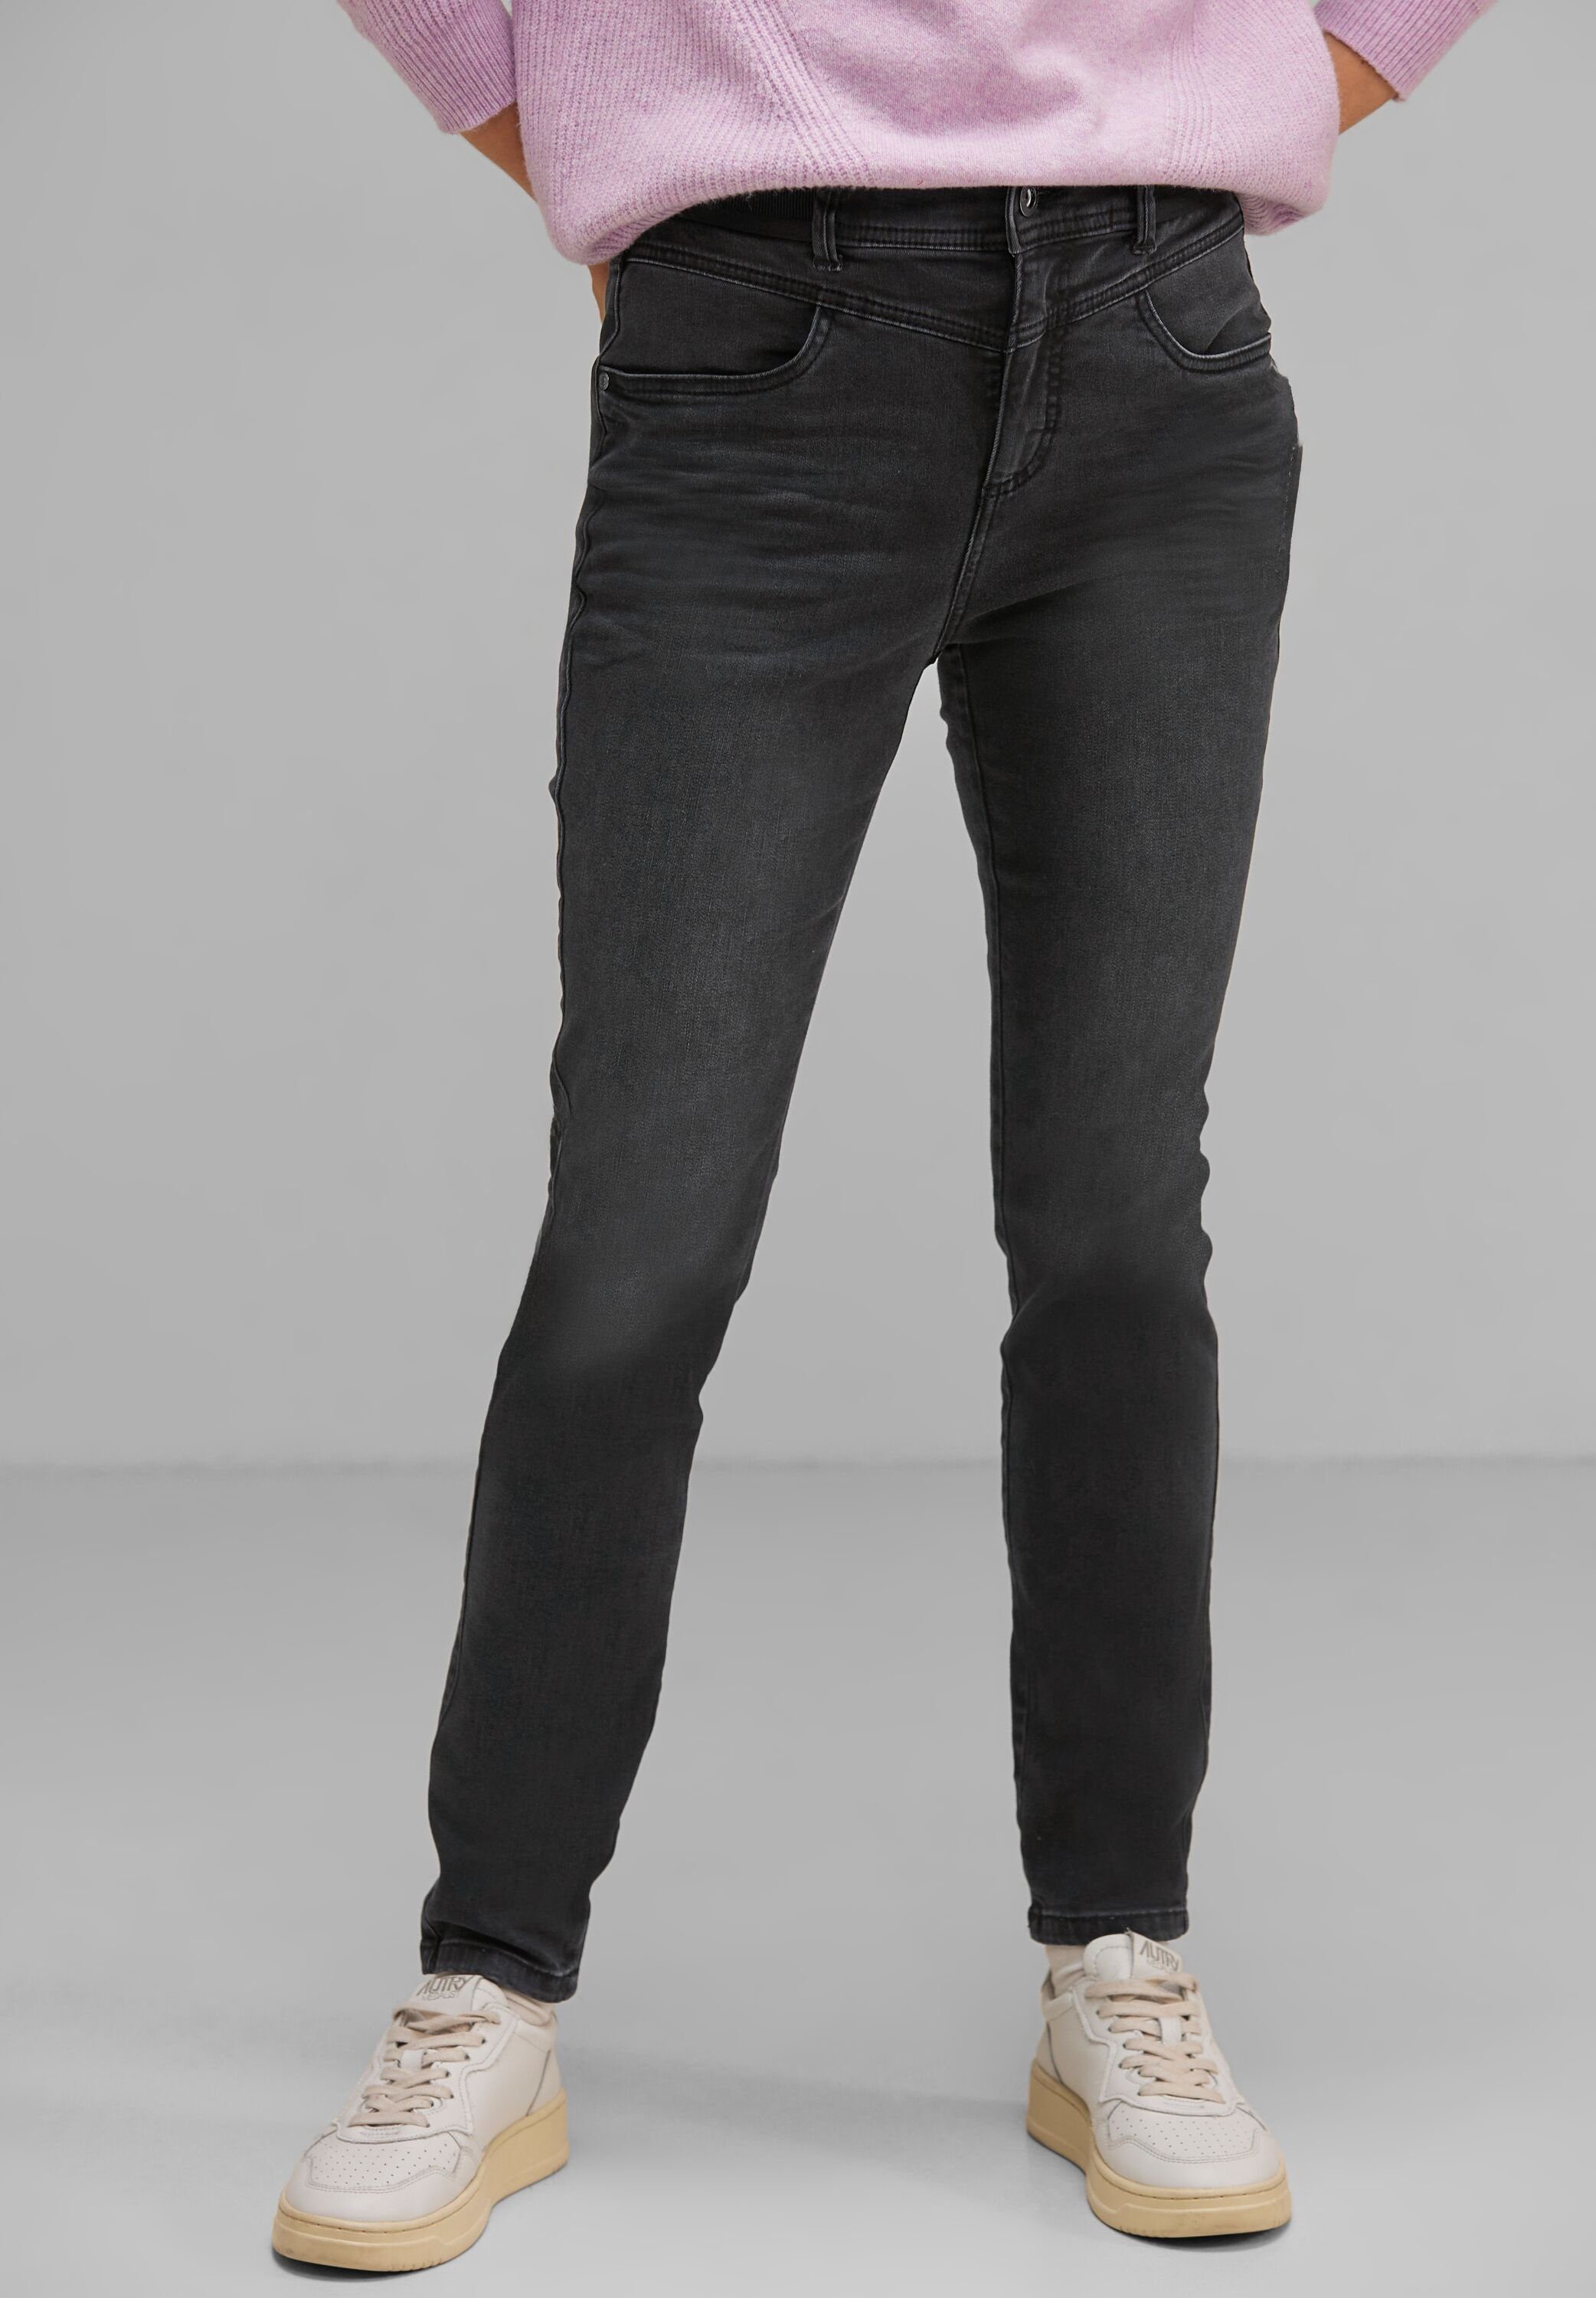 STREET ONE Skinny-fit-Jeans High Waist, Skinny Fit Jeans